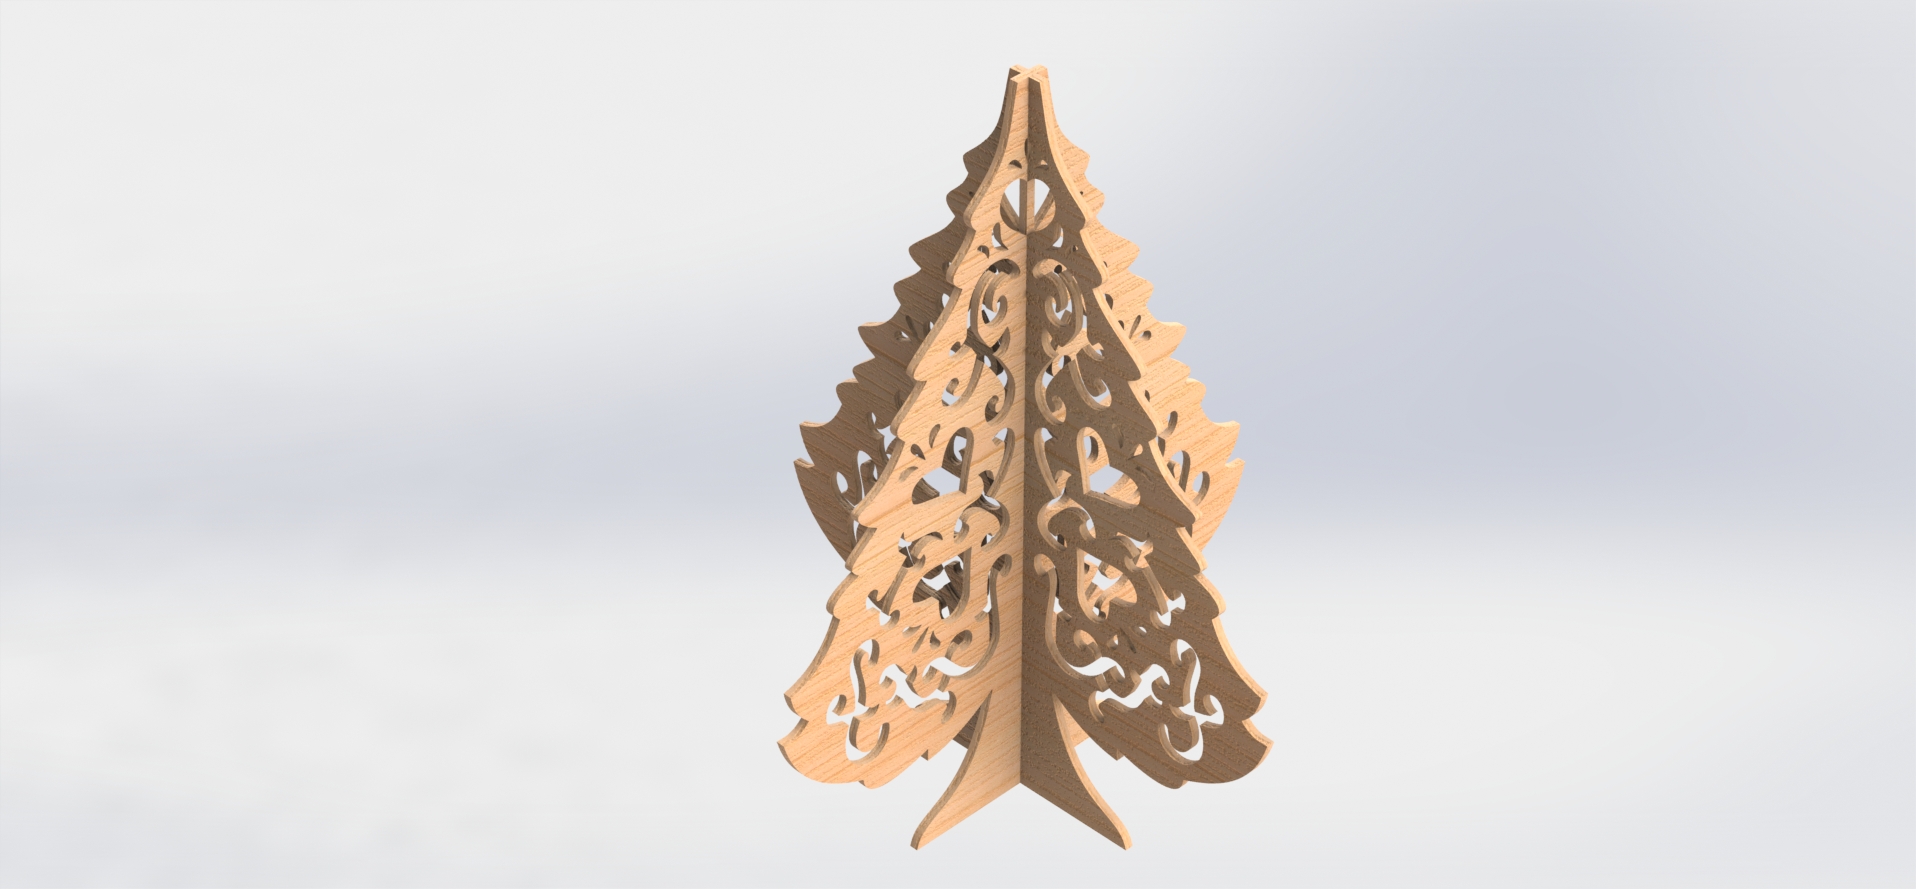 ArtCAM Laser DXF File Christmas Tree 2D Vector CNC Router Woodworking 006 - CNC  ROUTER DESIGN - FILES FOR CNC ROUTER AND LASER CUTTING